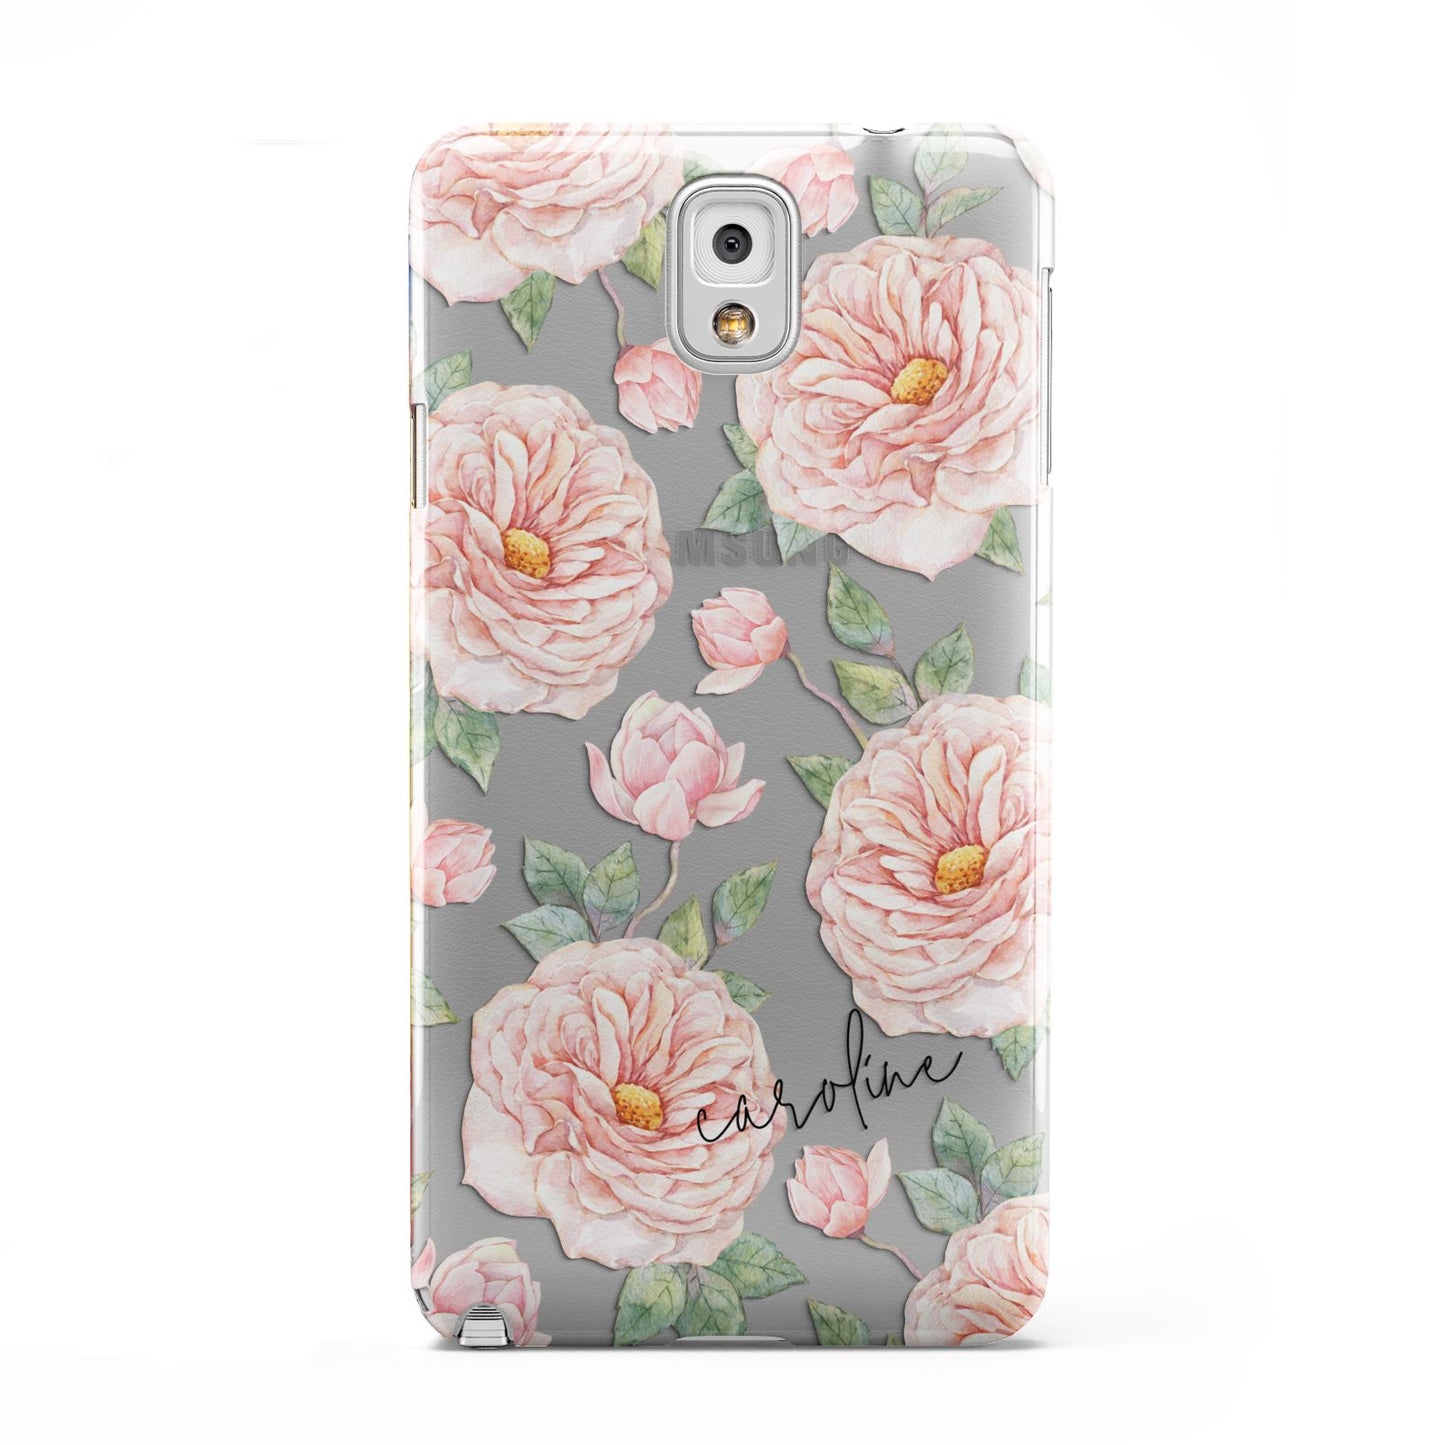 Personalised Peony Samsung Galaxy Note 3 Case